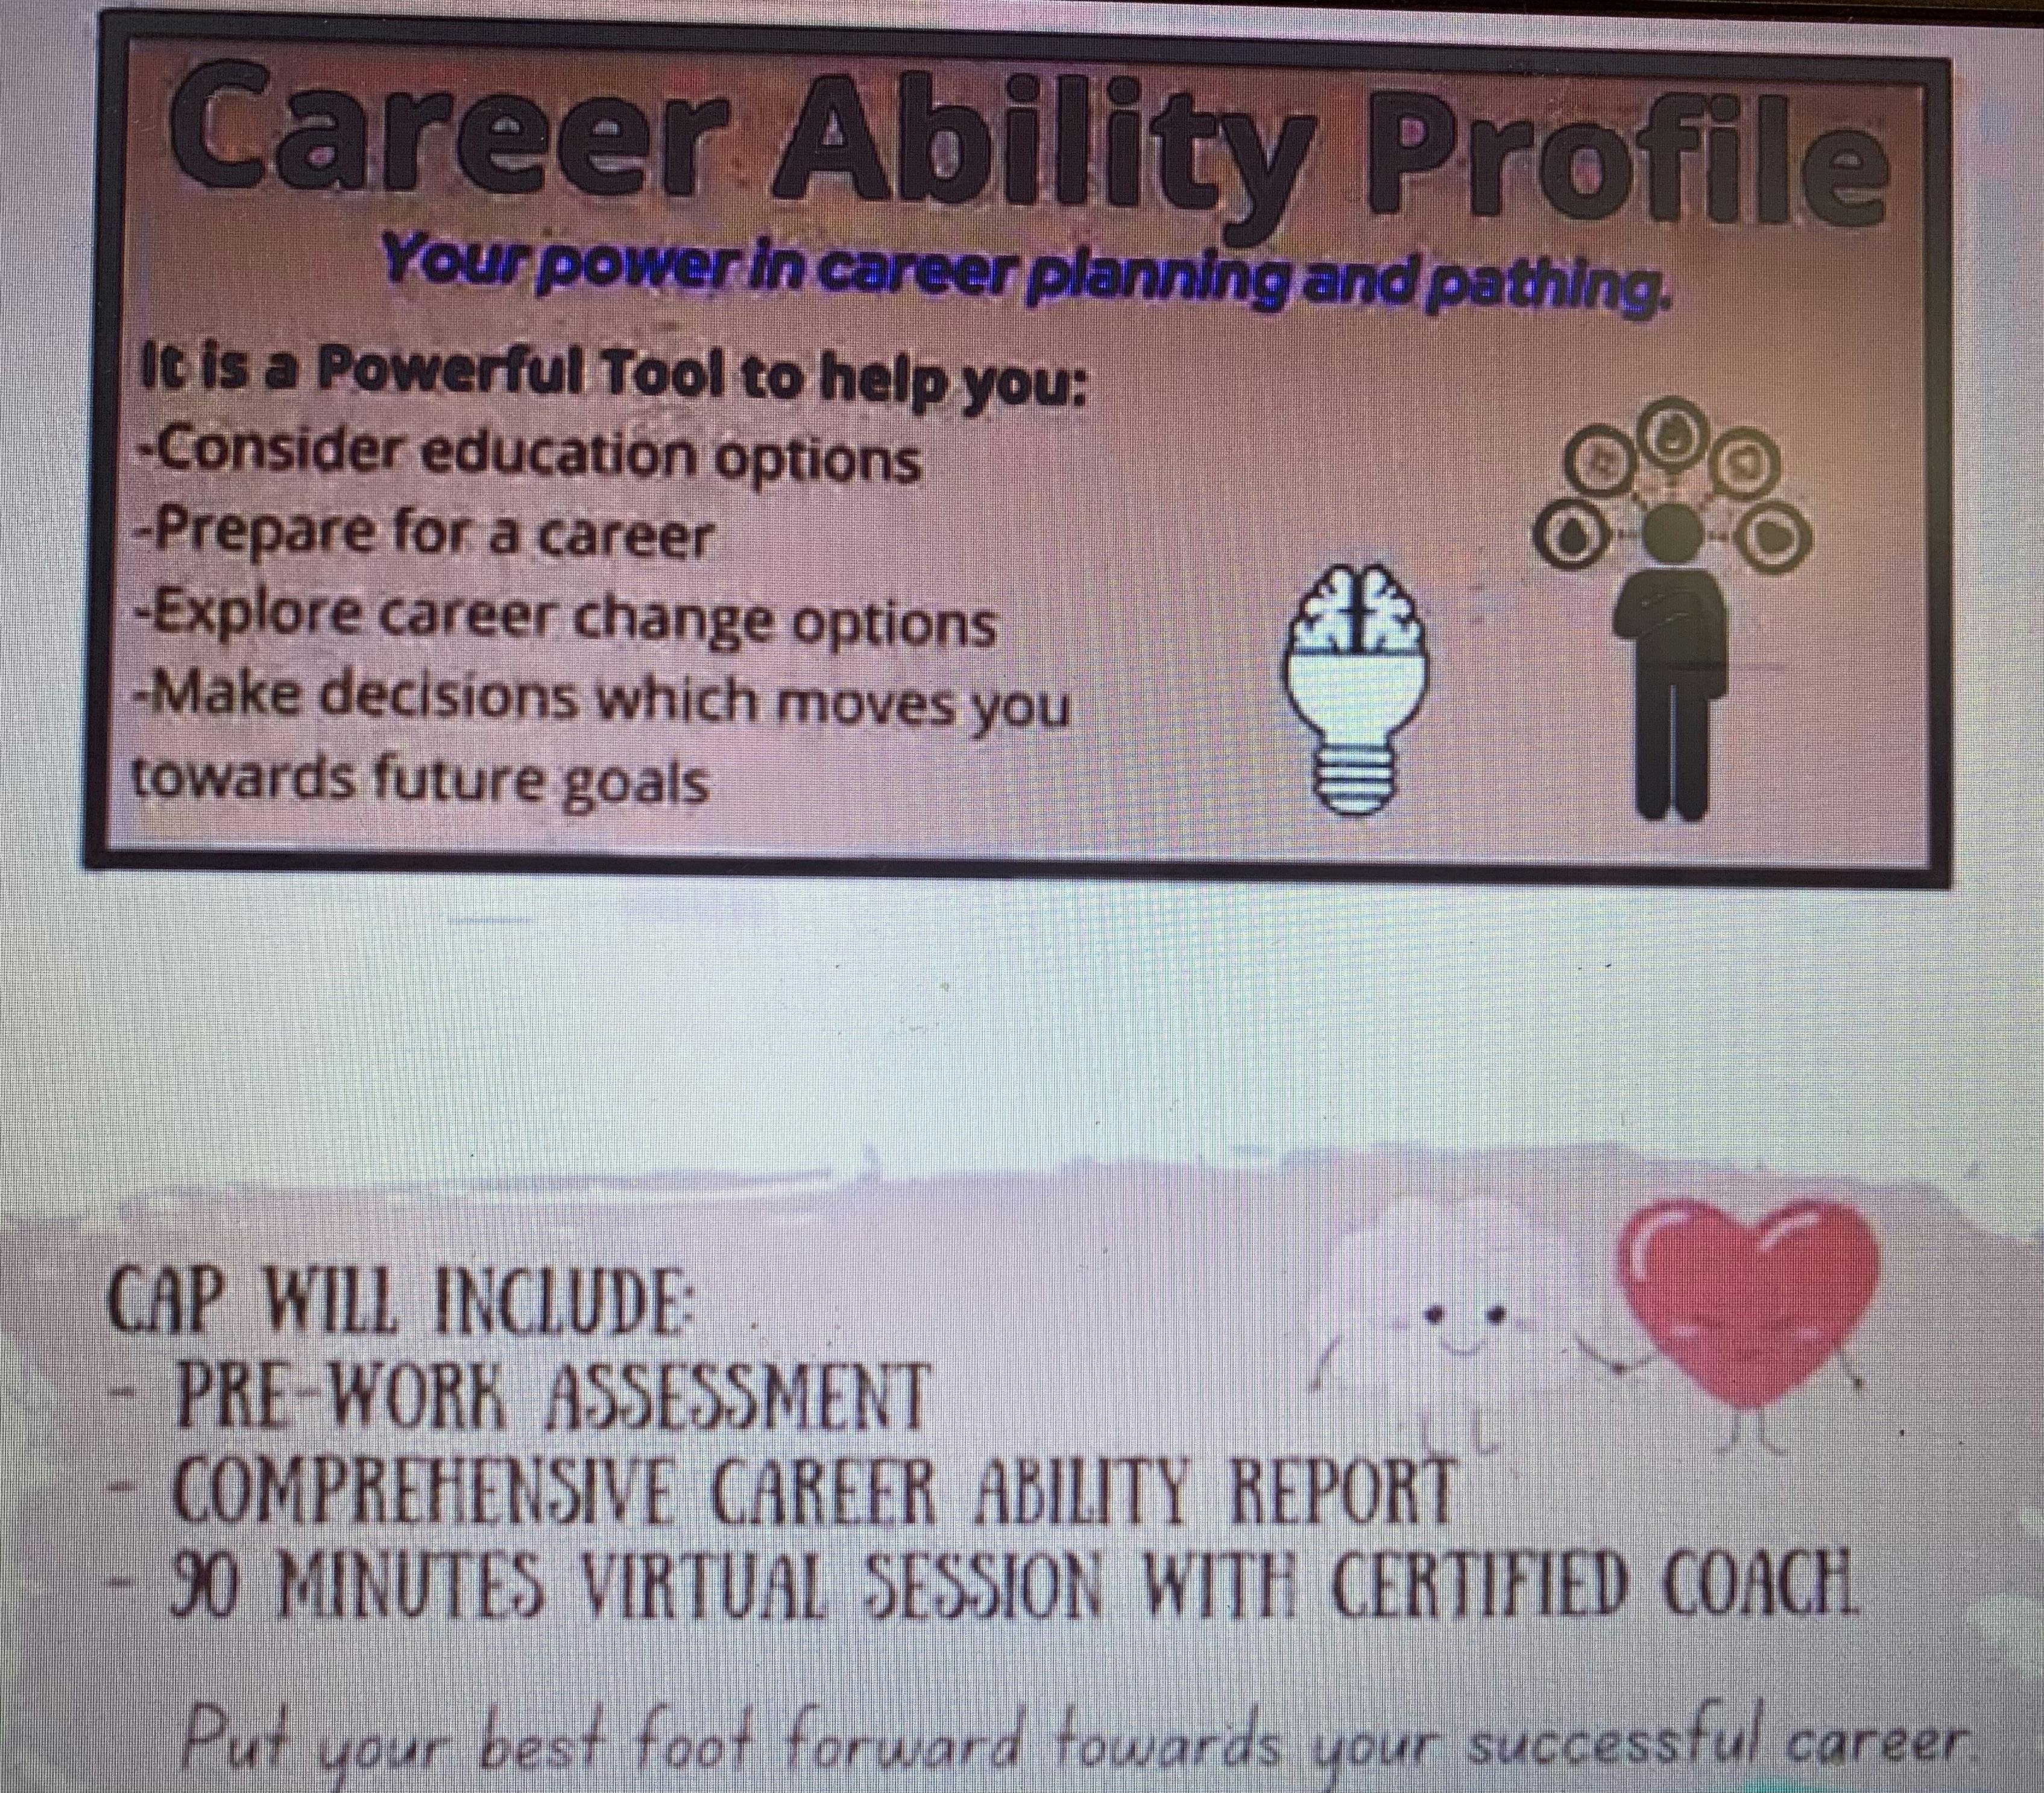 Career Ability Profile- Power up career planning